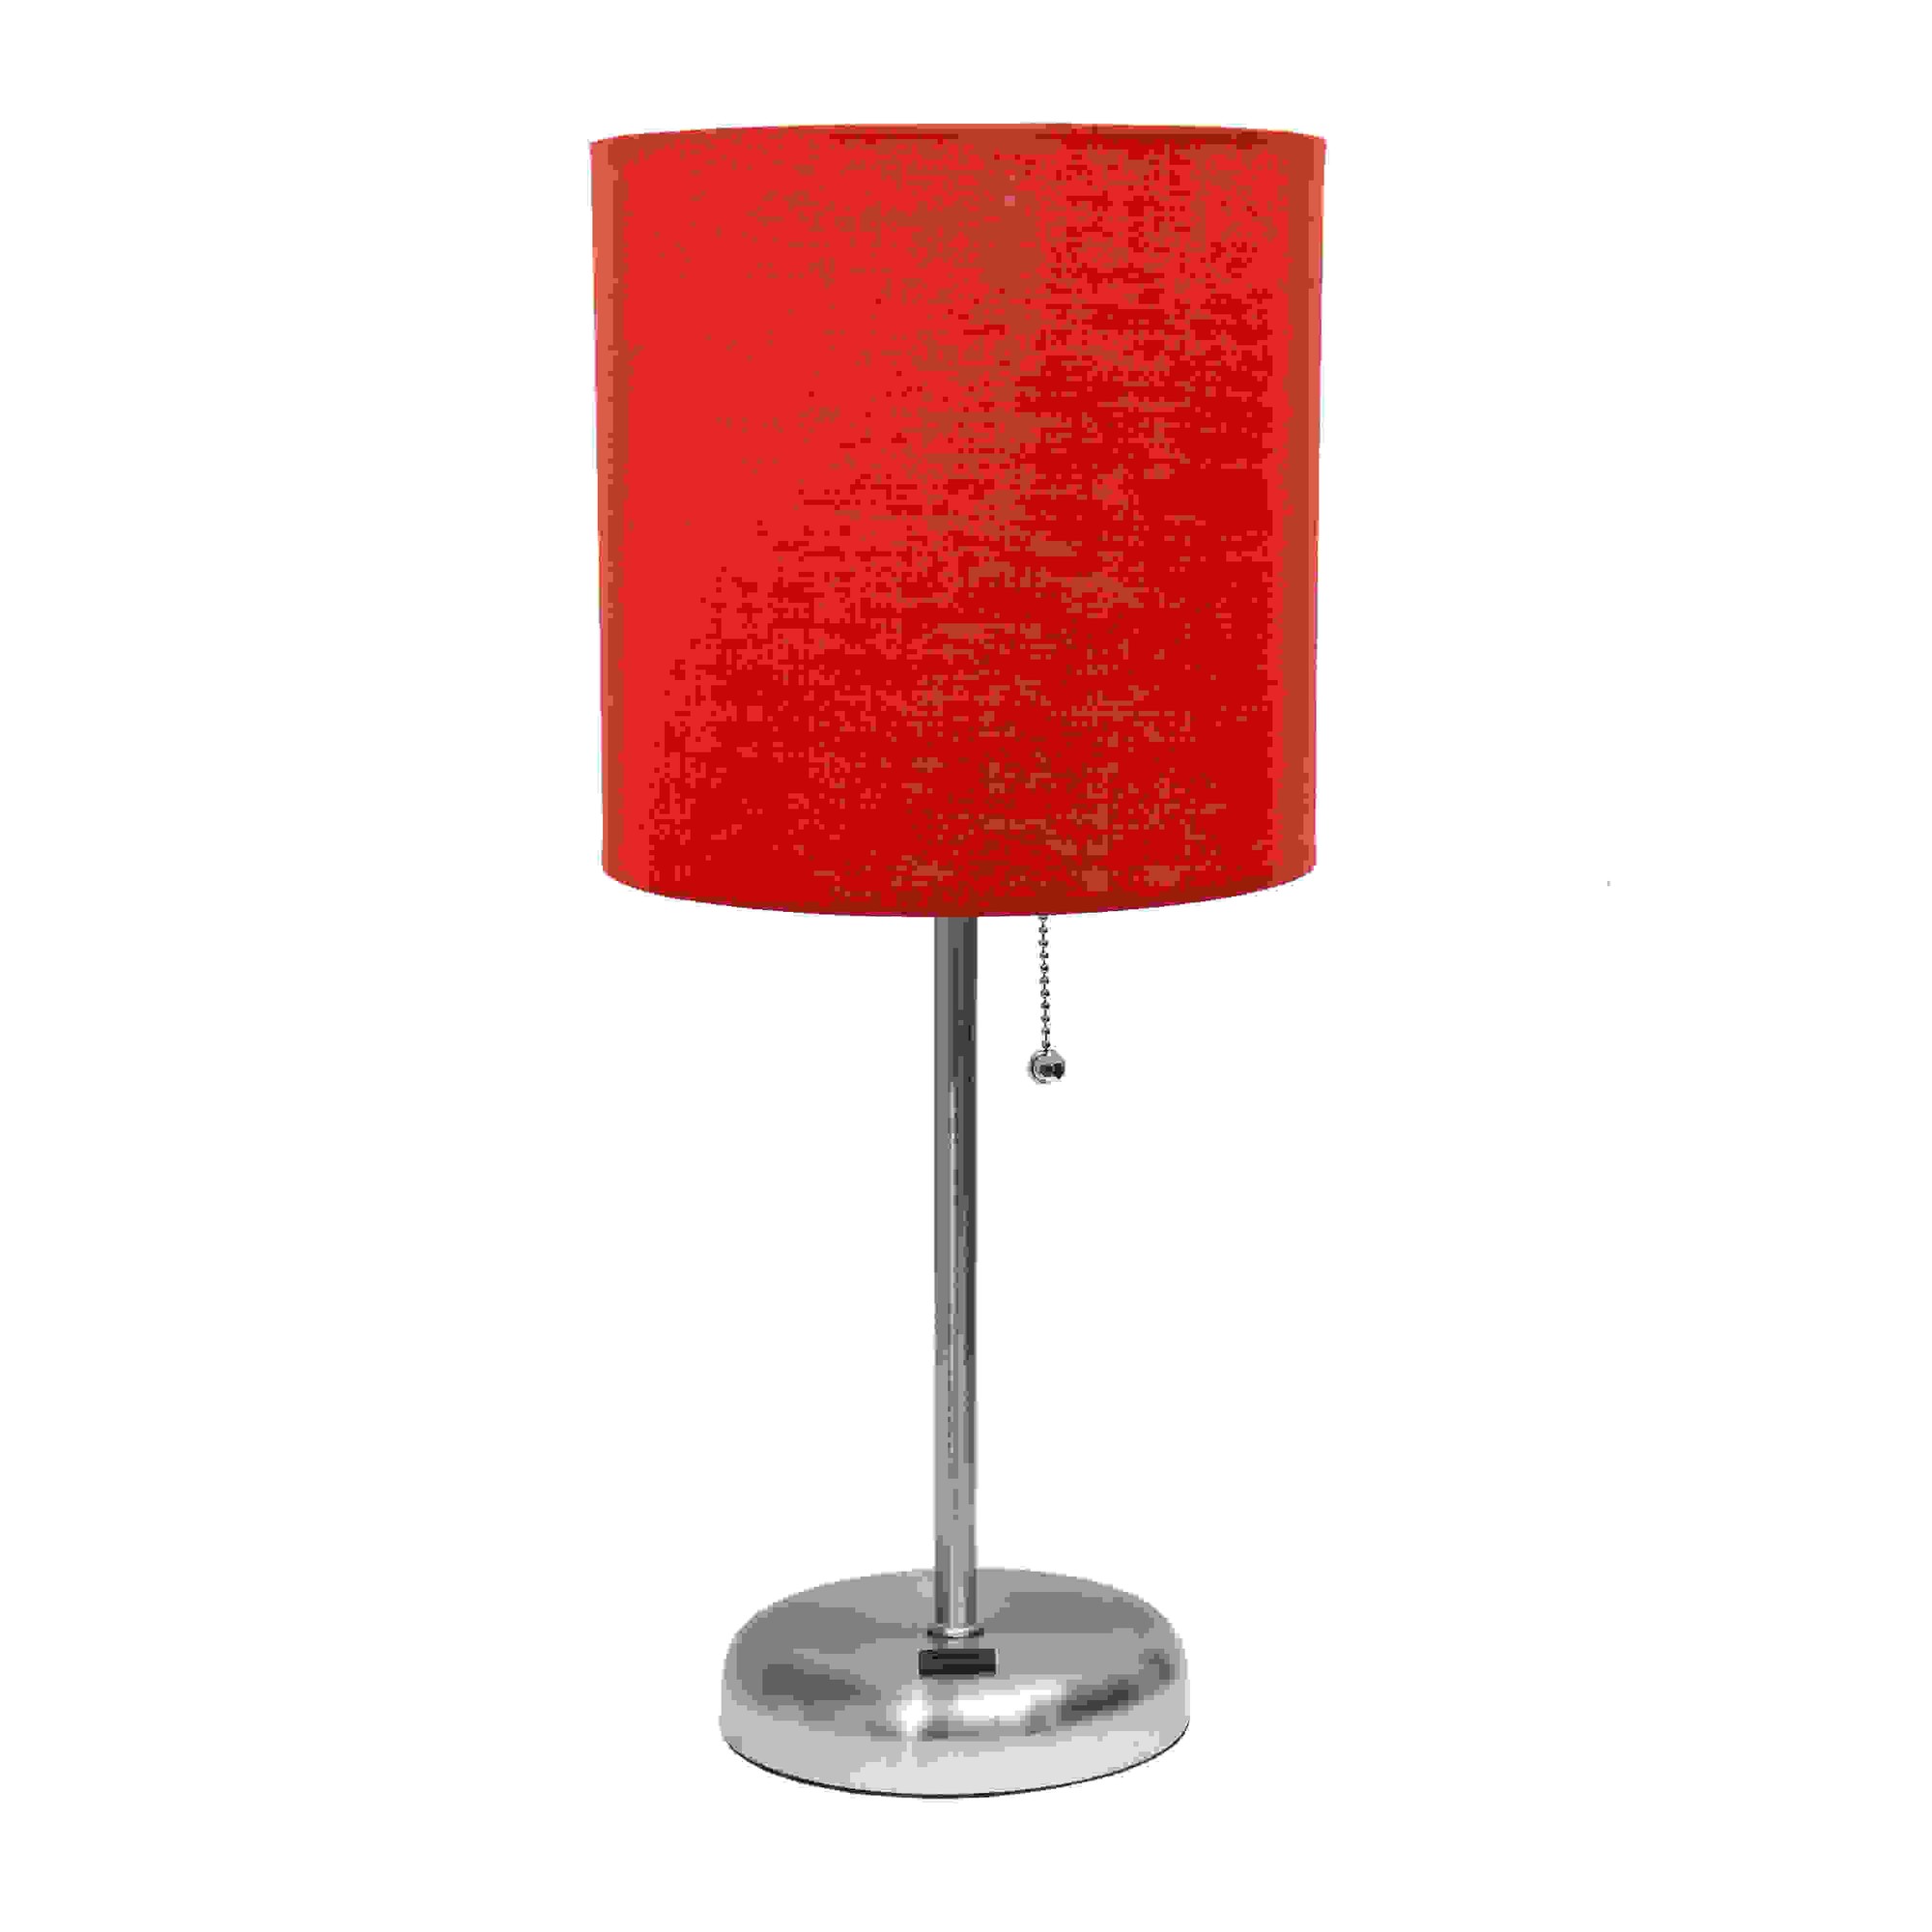 Simple Designs Stick Lamp with USB charging port and Fabric Shade, Red